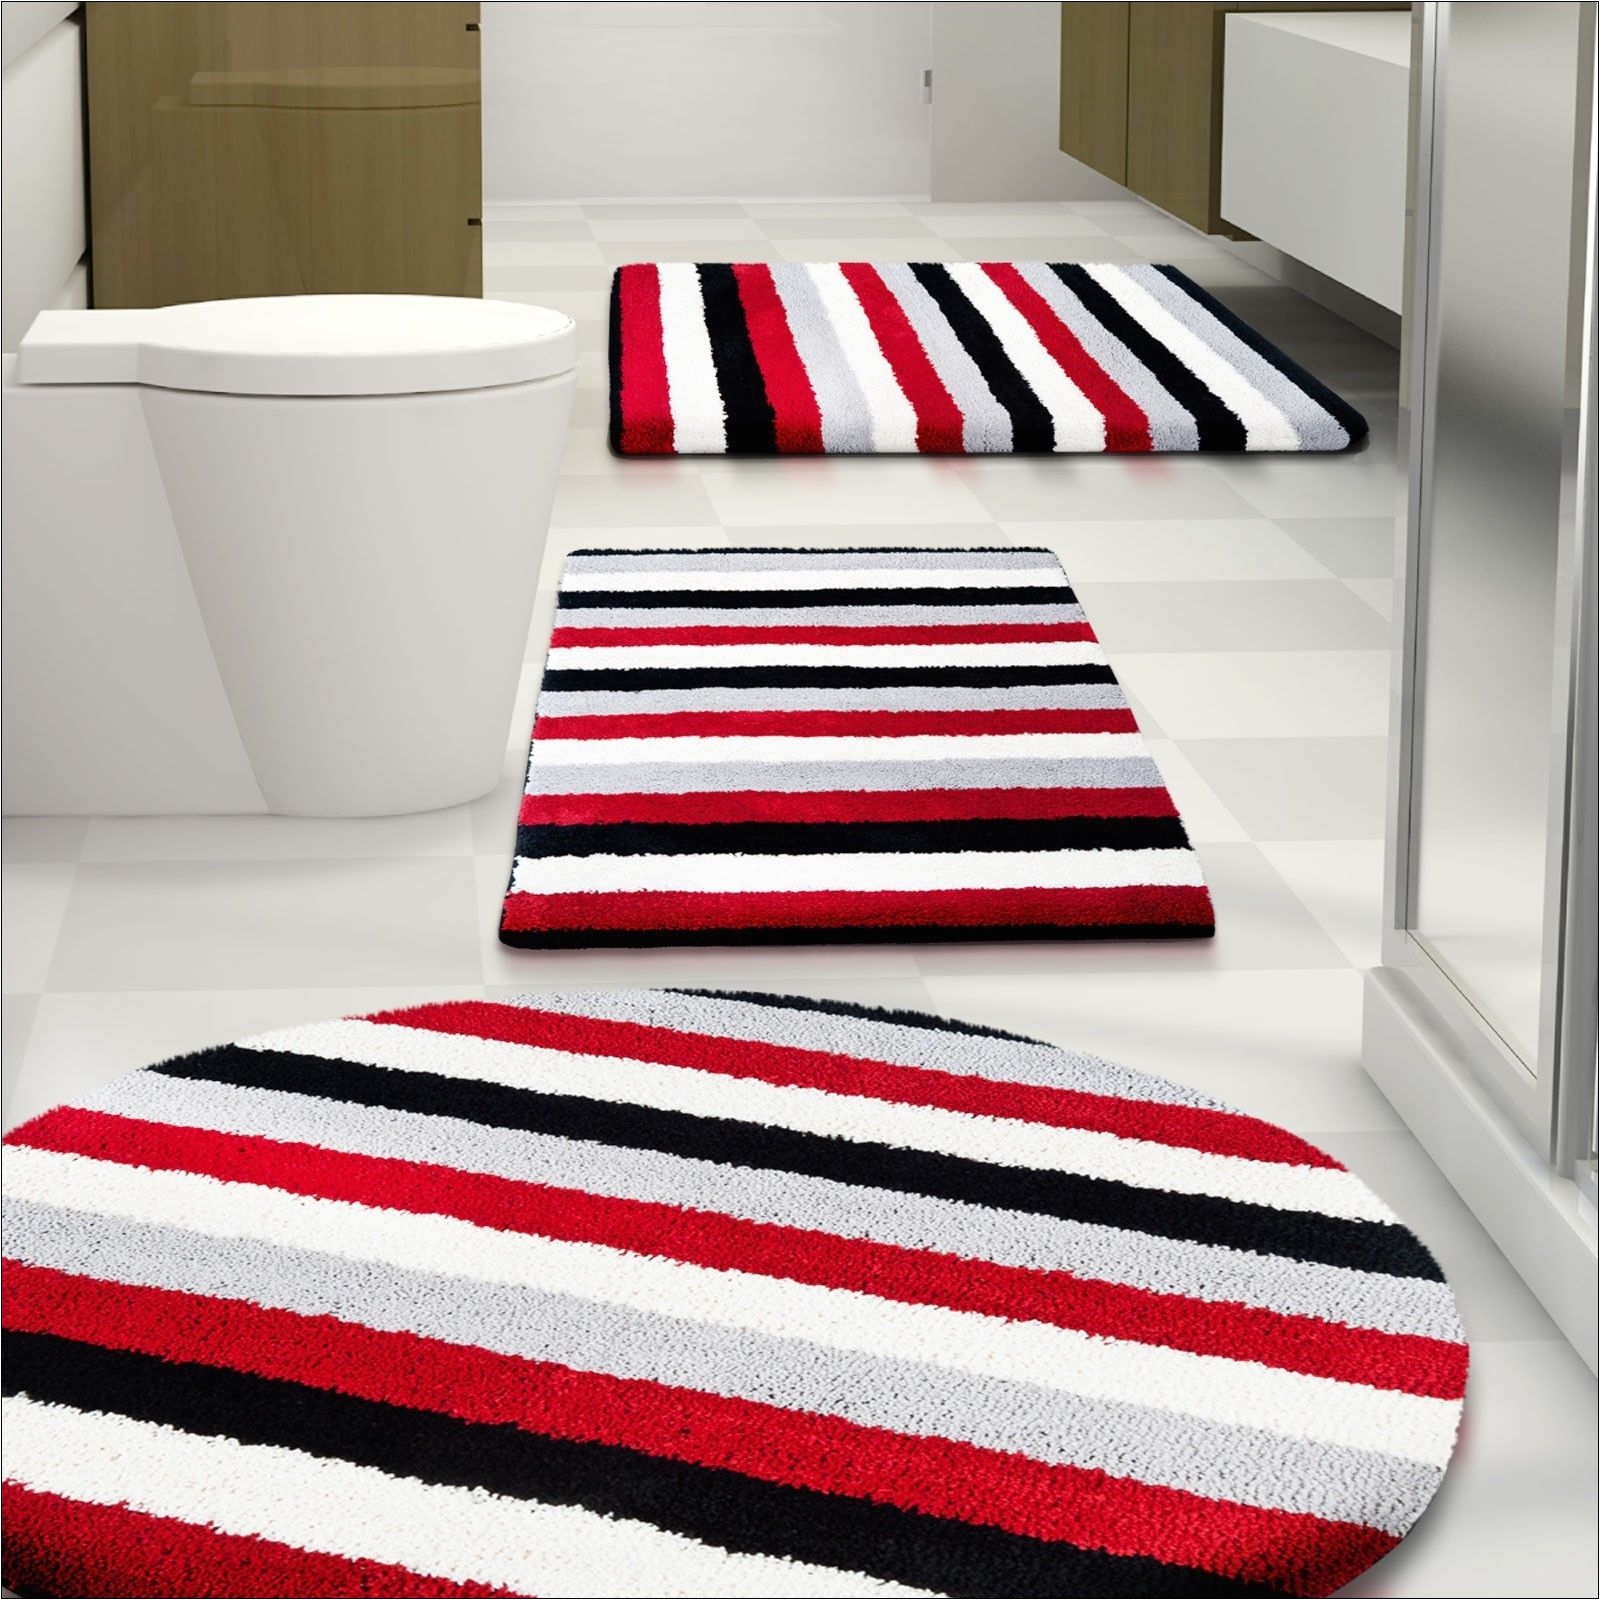 red bath mats and rugs